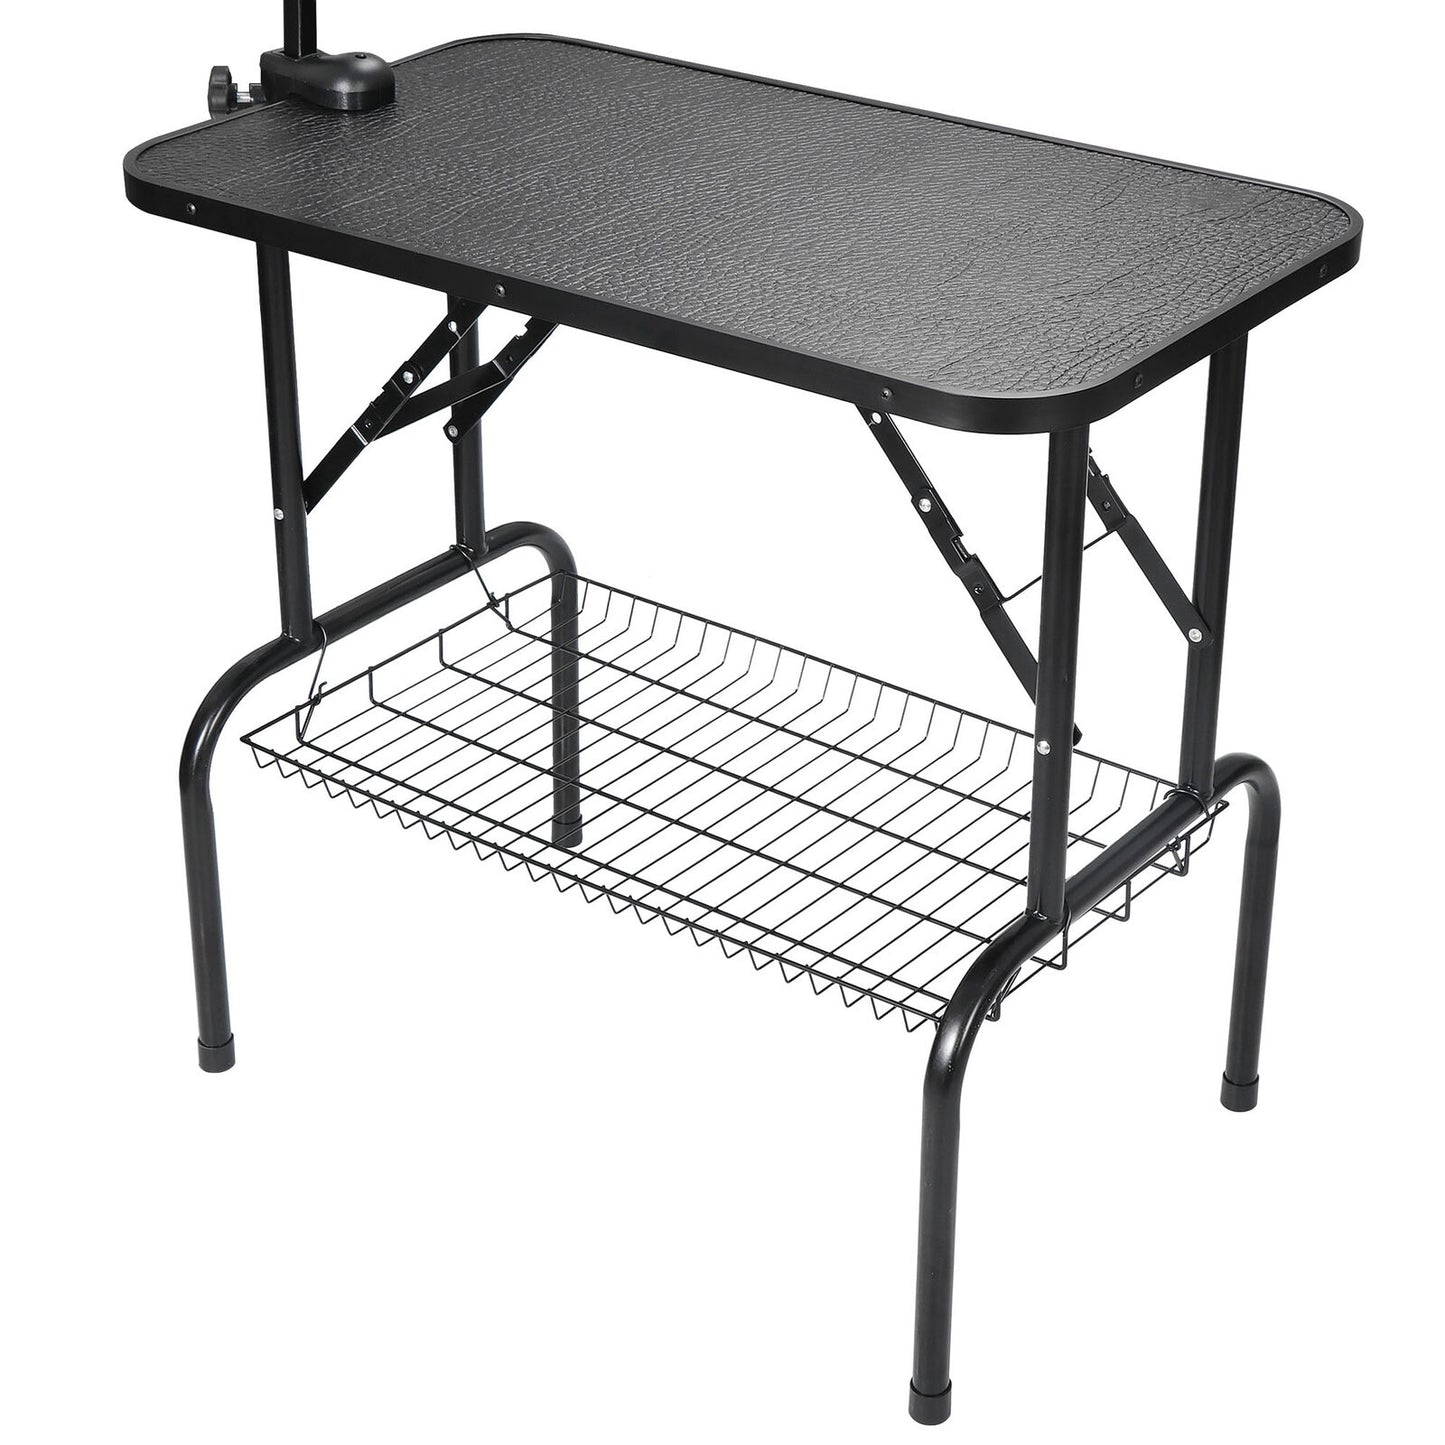 32'' Large Portable Pet Dog Cat Grooming Table Dog Show W/Arm &Noose & Mesh Tray